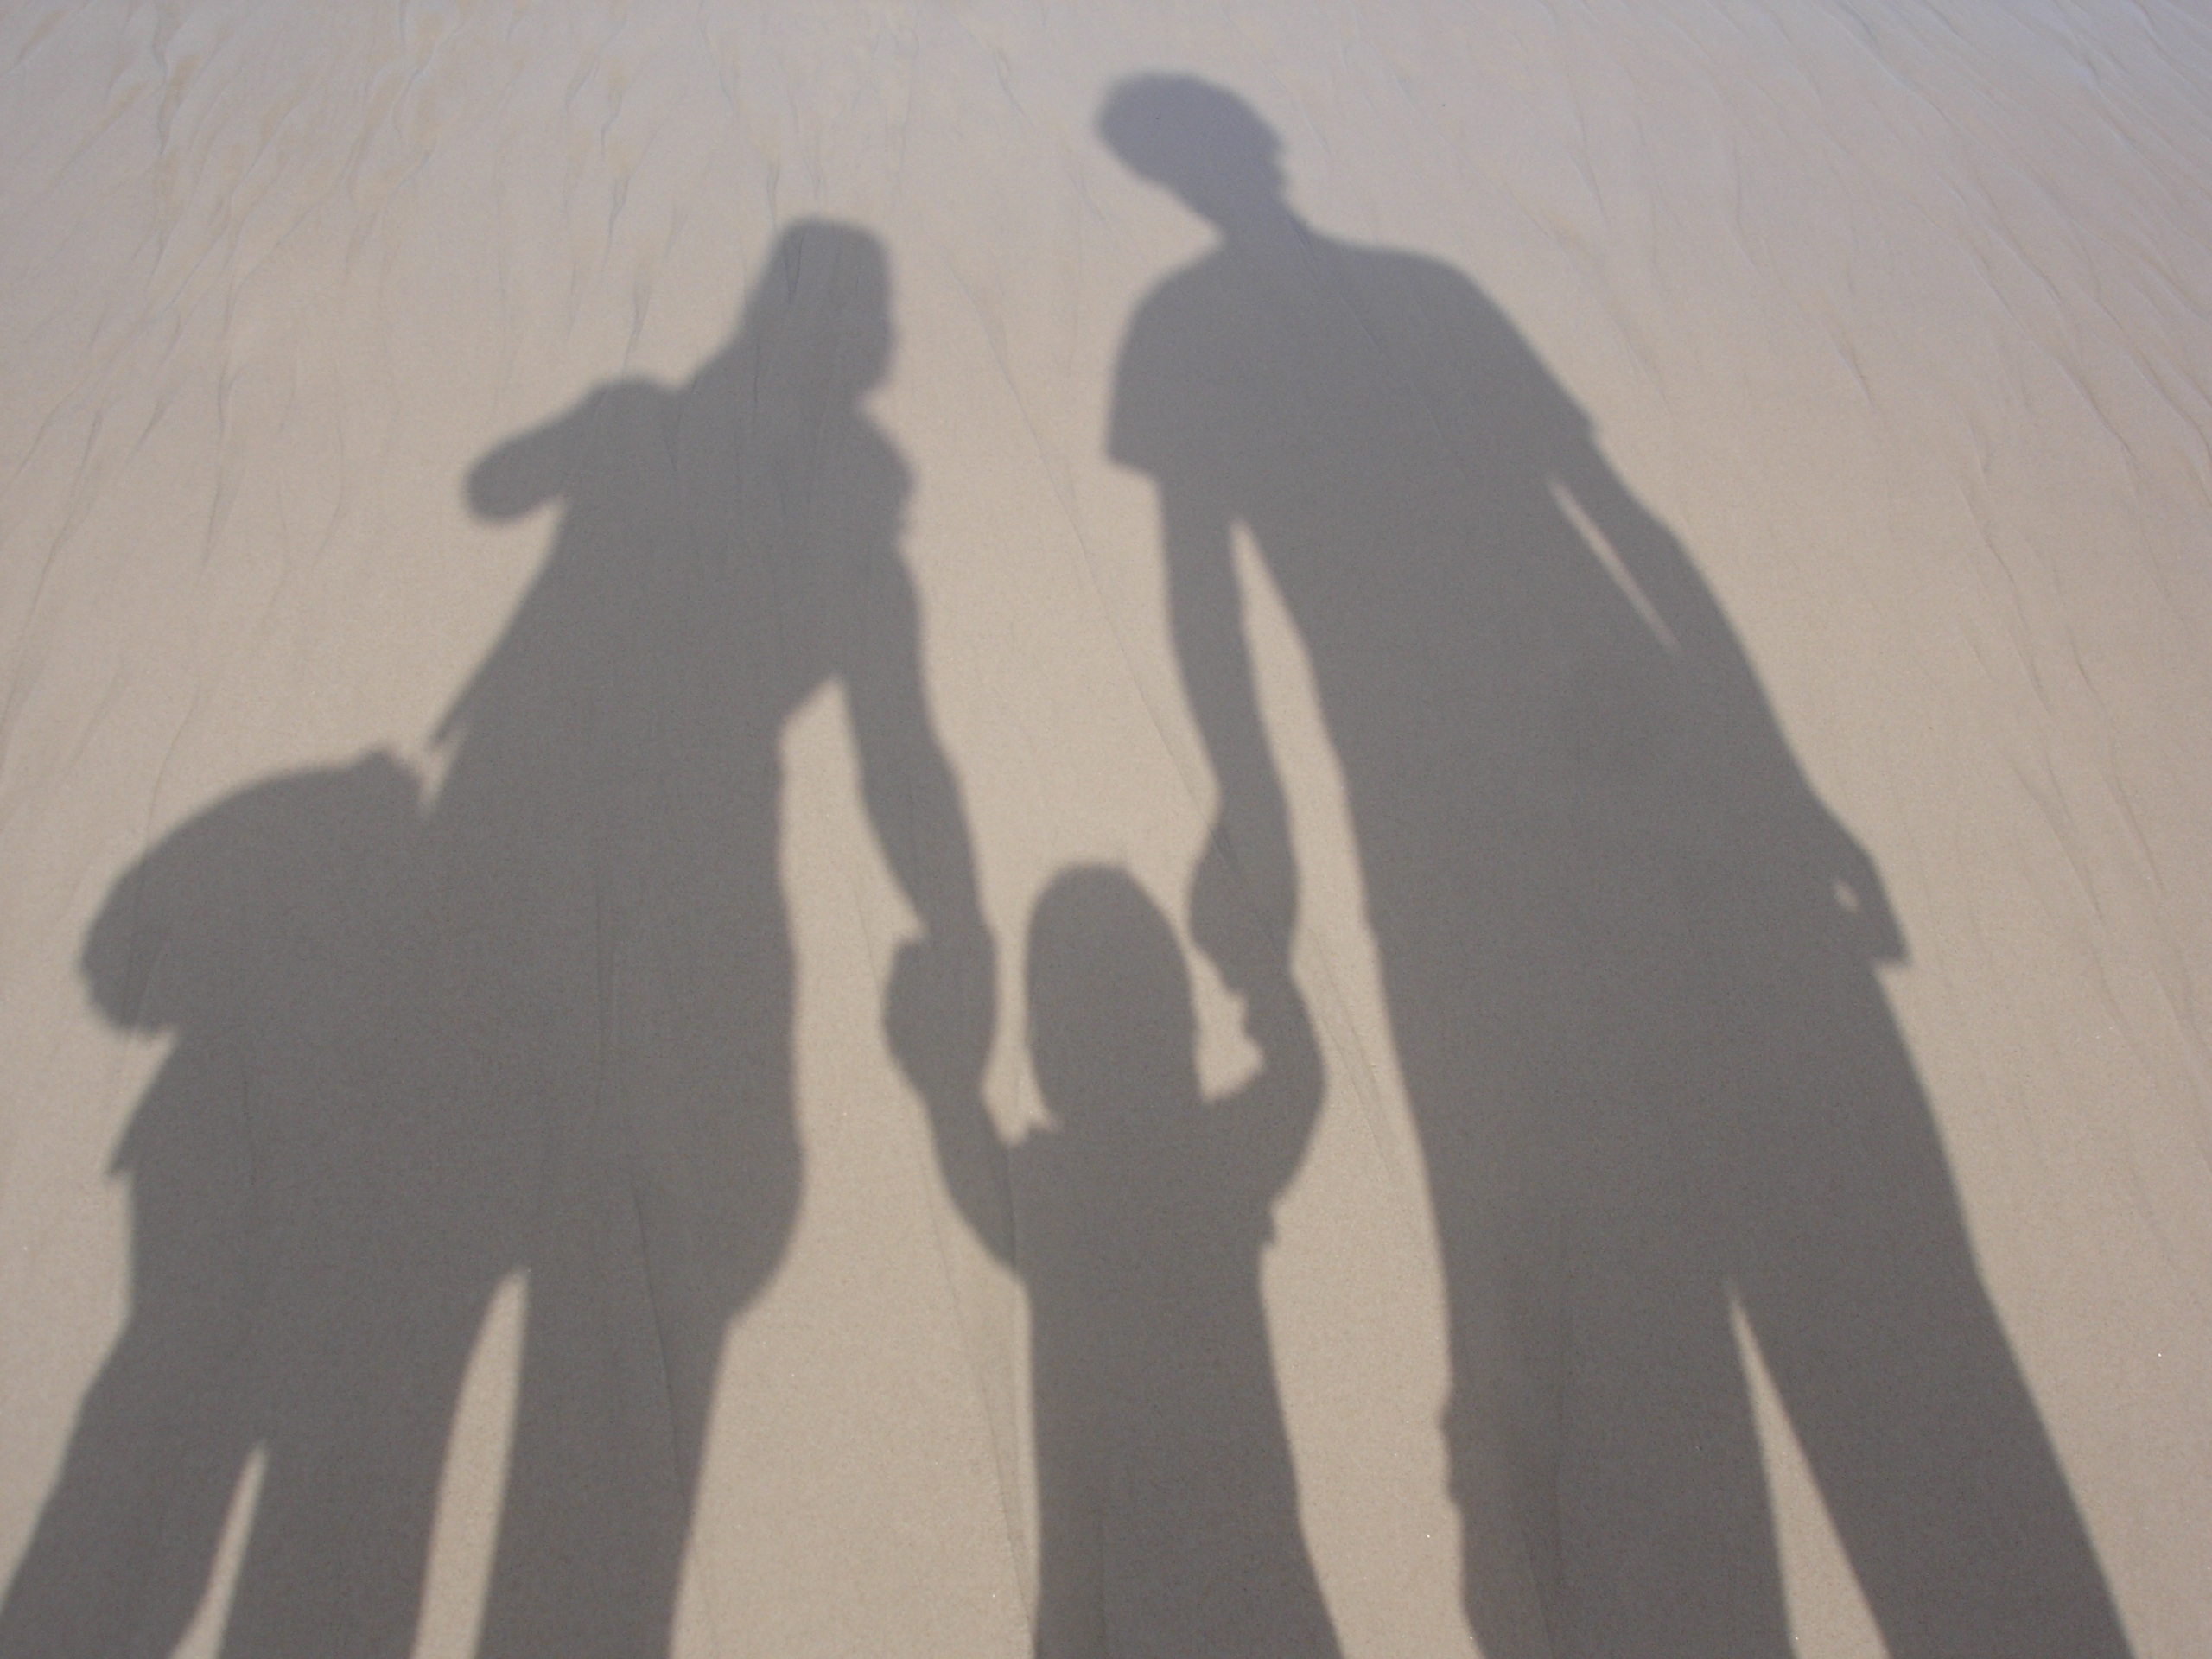 beach-silhouette-vacation-shadow-together-lifestyle-927341-pxhere.com